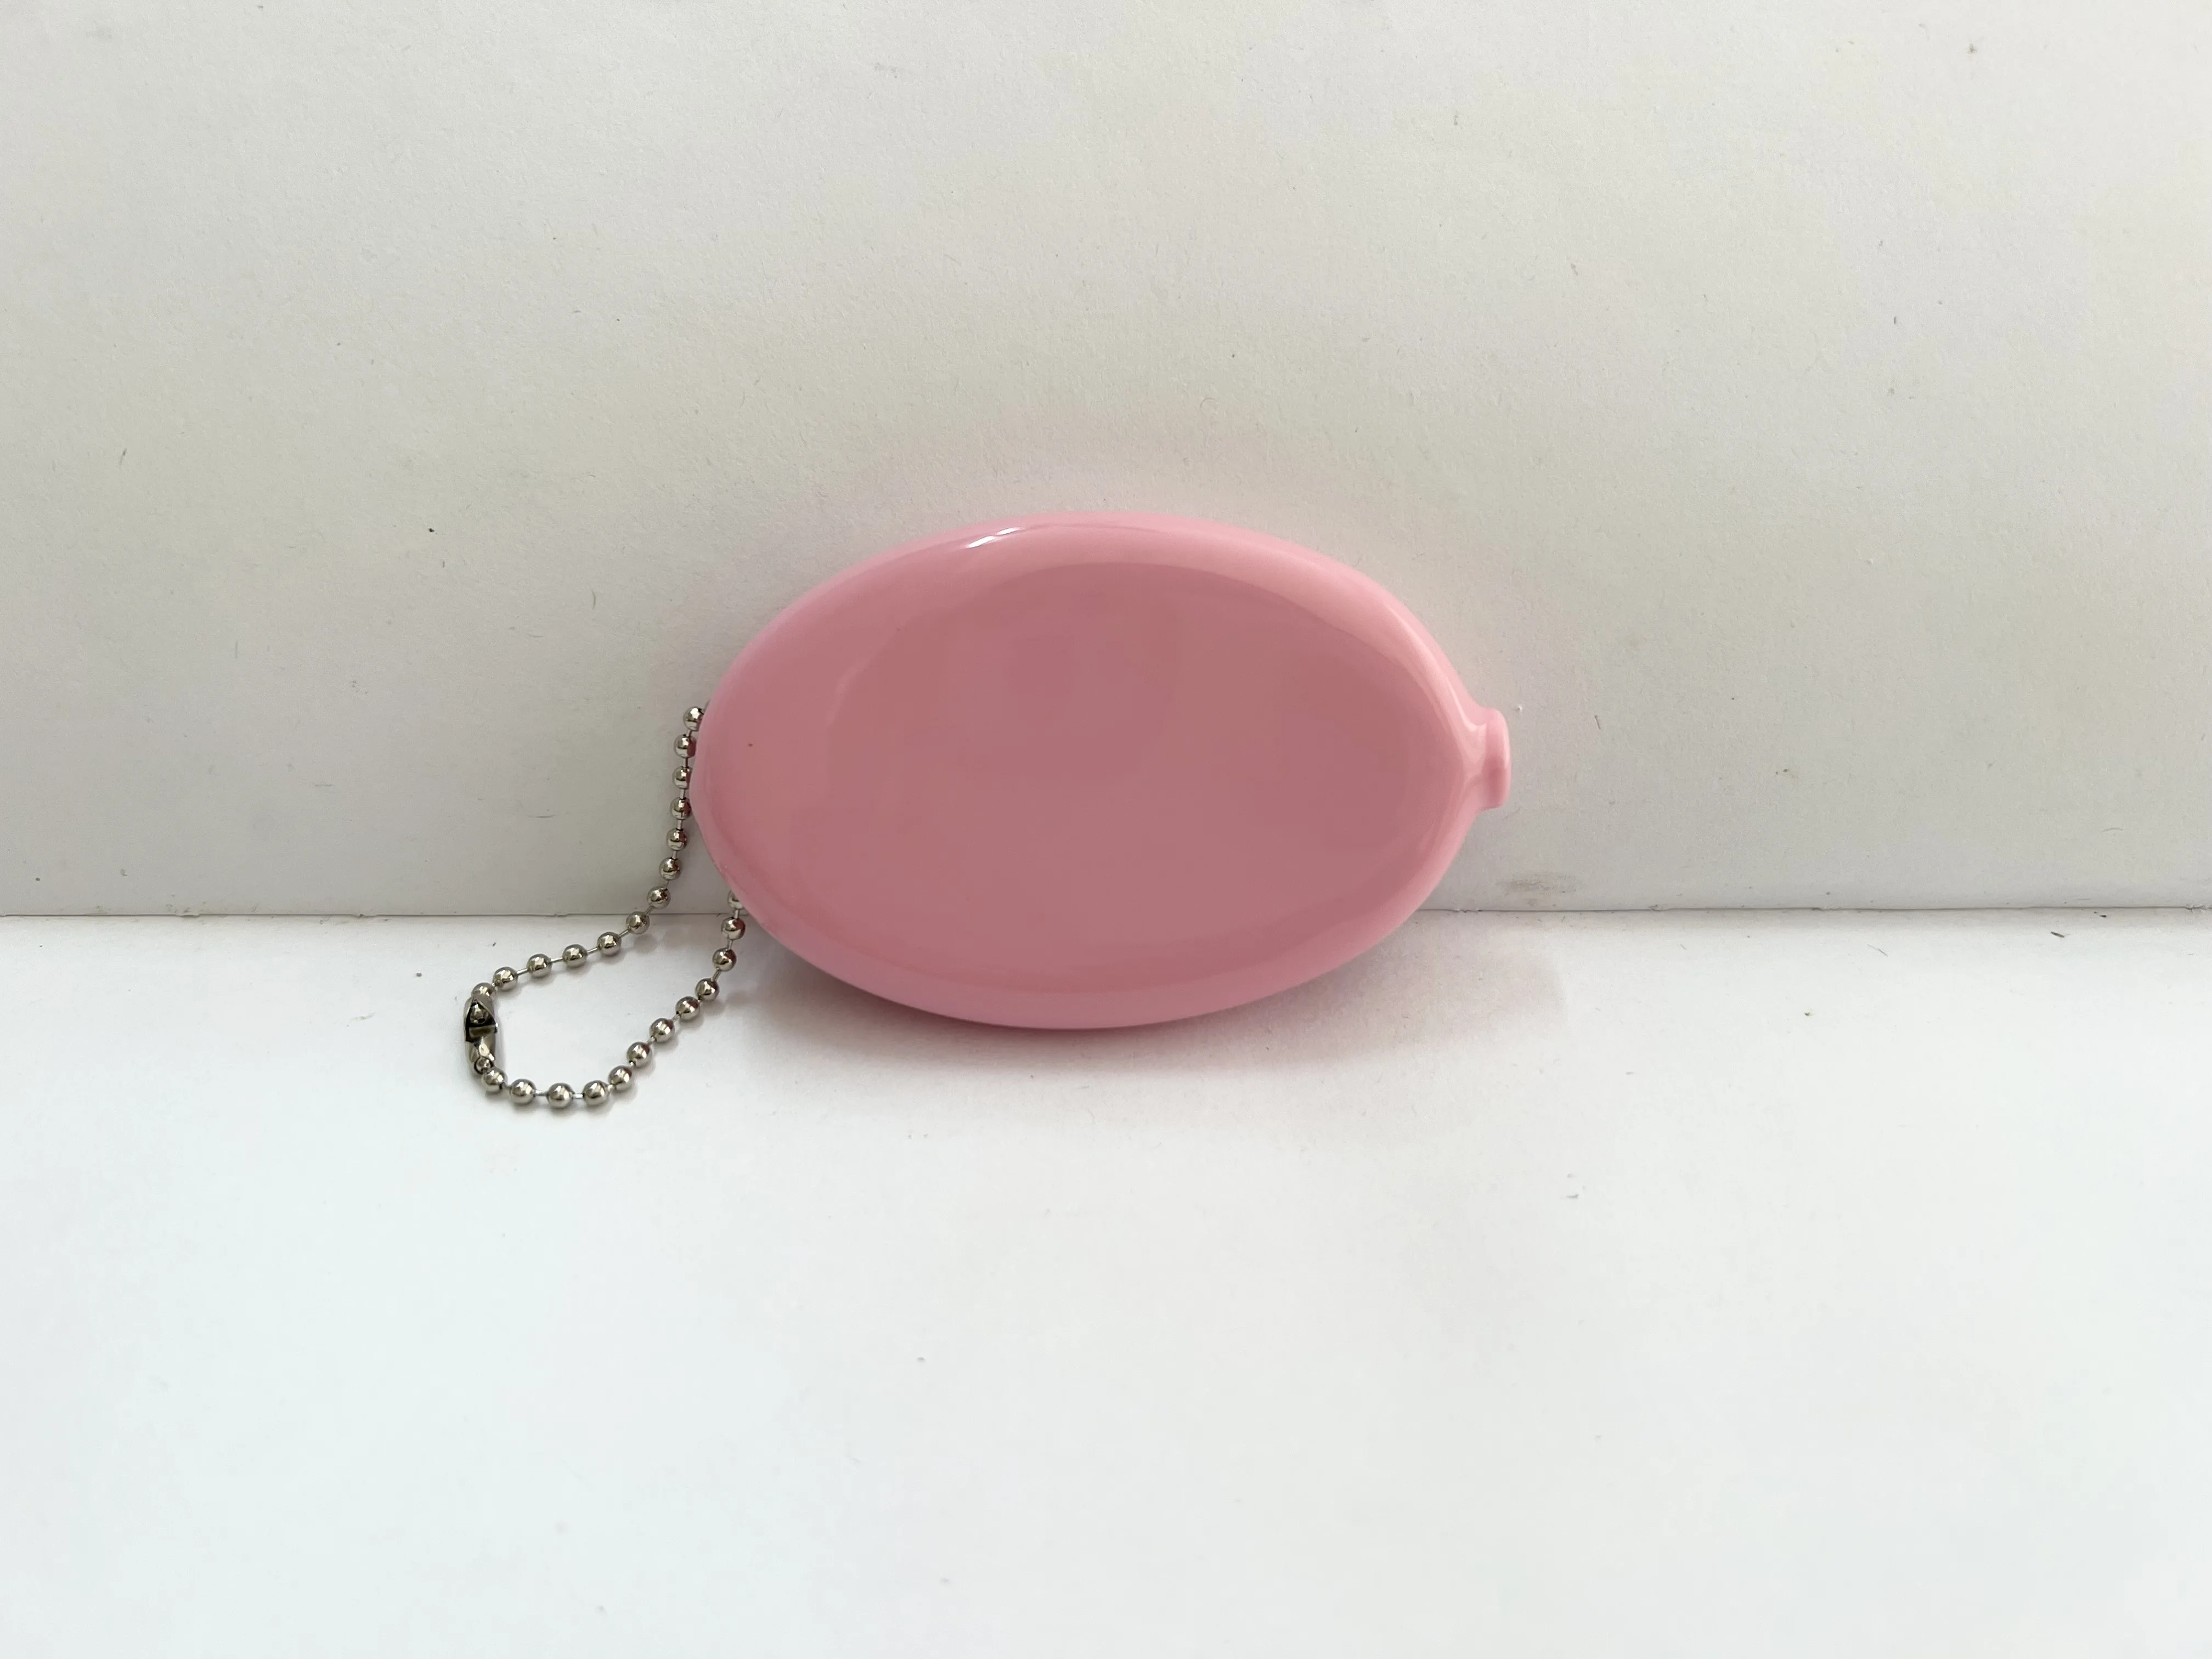 I'd like to mold a soft silicone part similar to the rubber coin purse  above. How complex/expensive will the mold be? : r/InjectionMolding